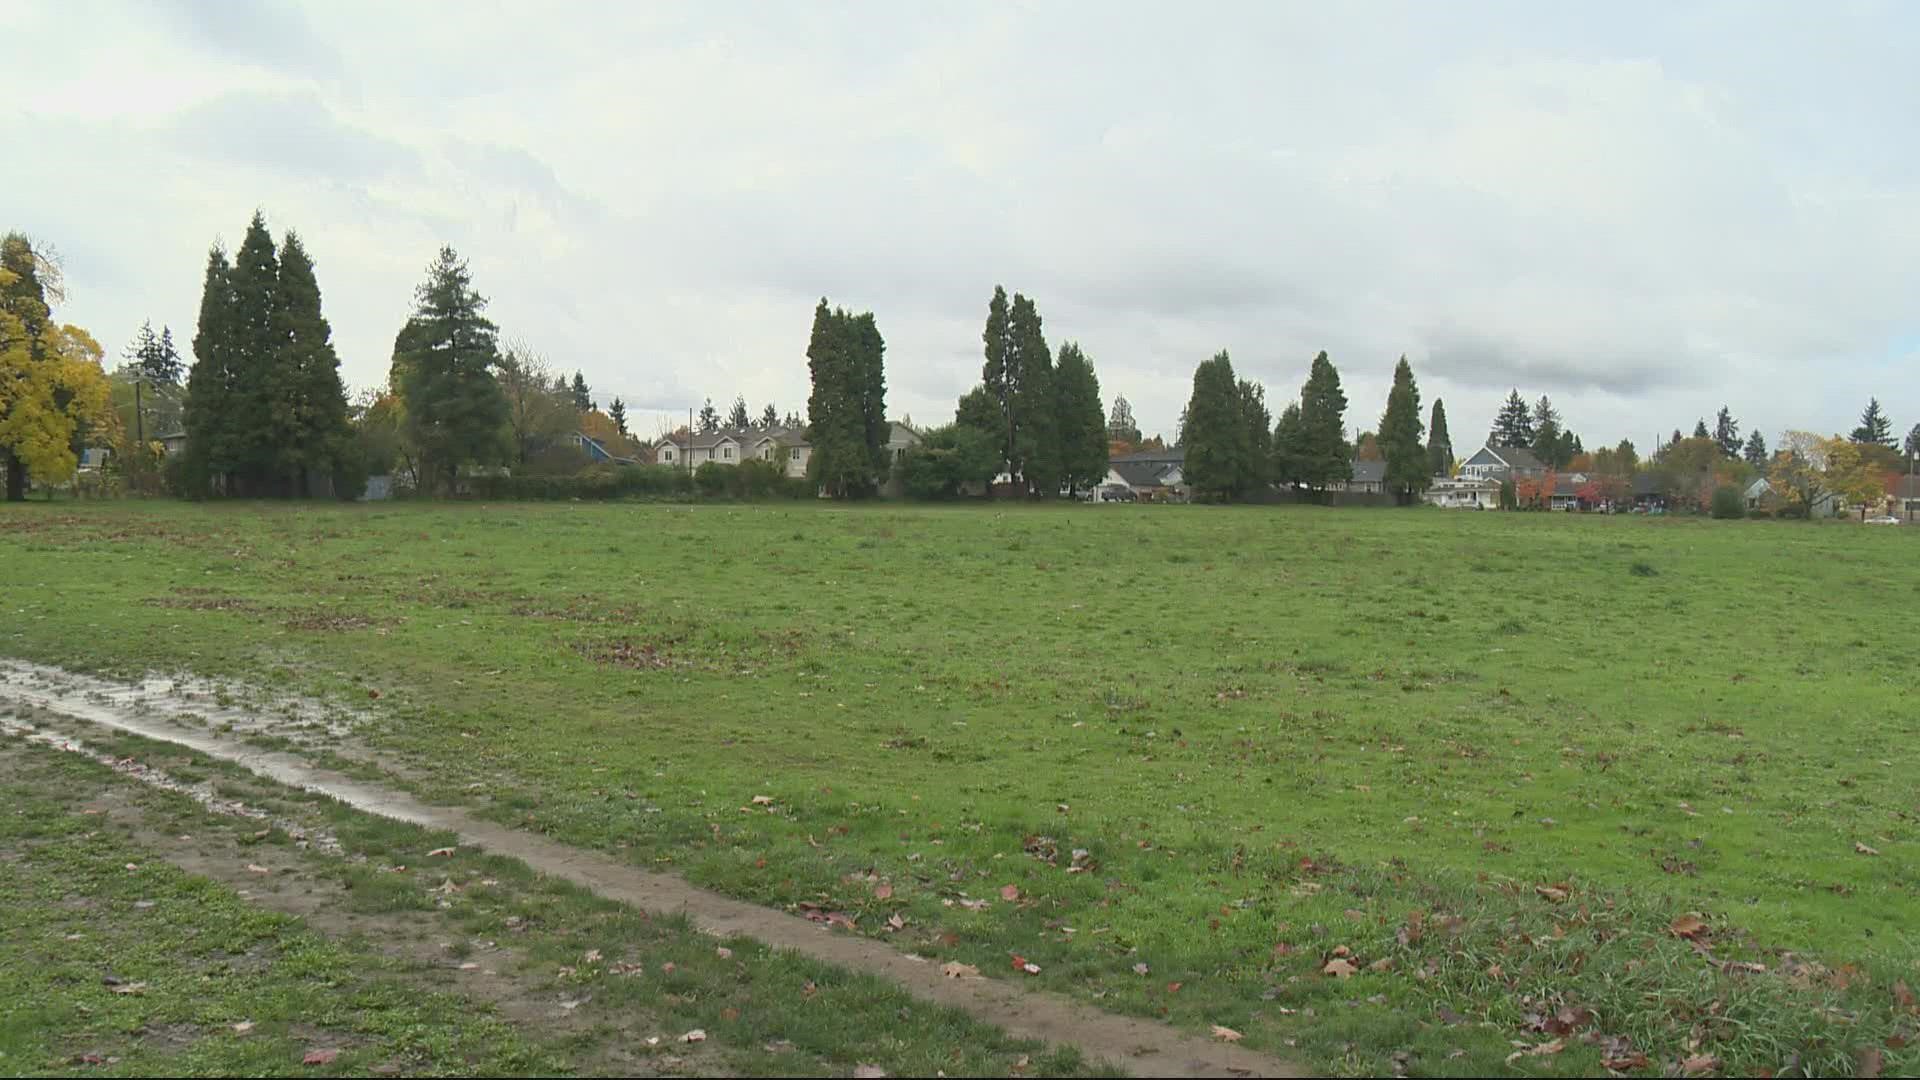 With time running out to find Safe Rest Village sites before the end of the year, Portland is evaluating a former middle school campus.